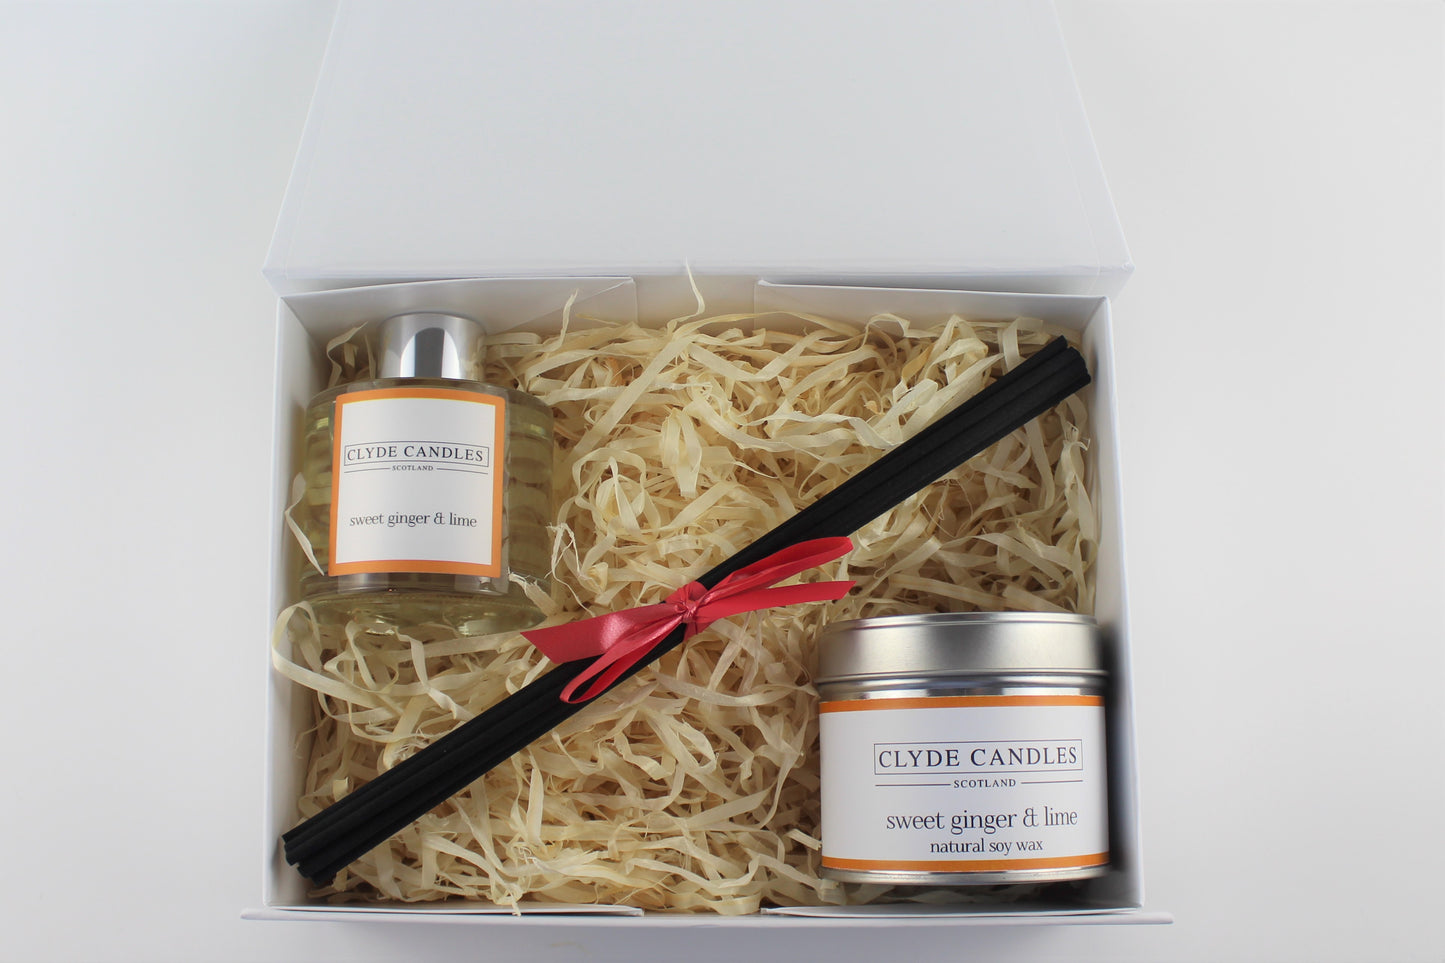 Sweet Ginger & Lime Diffuser & Candle Gift Box Set - Scottish Natural Soy Candle